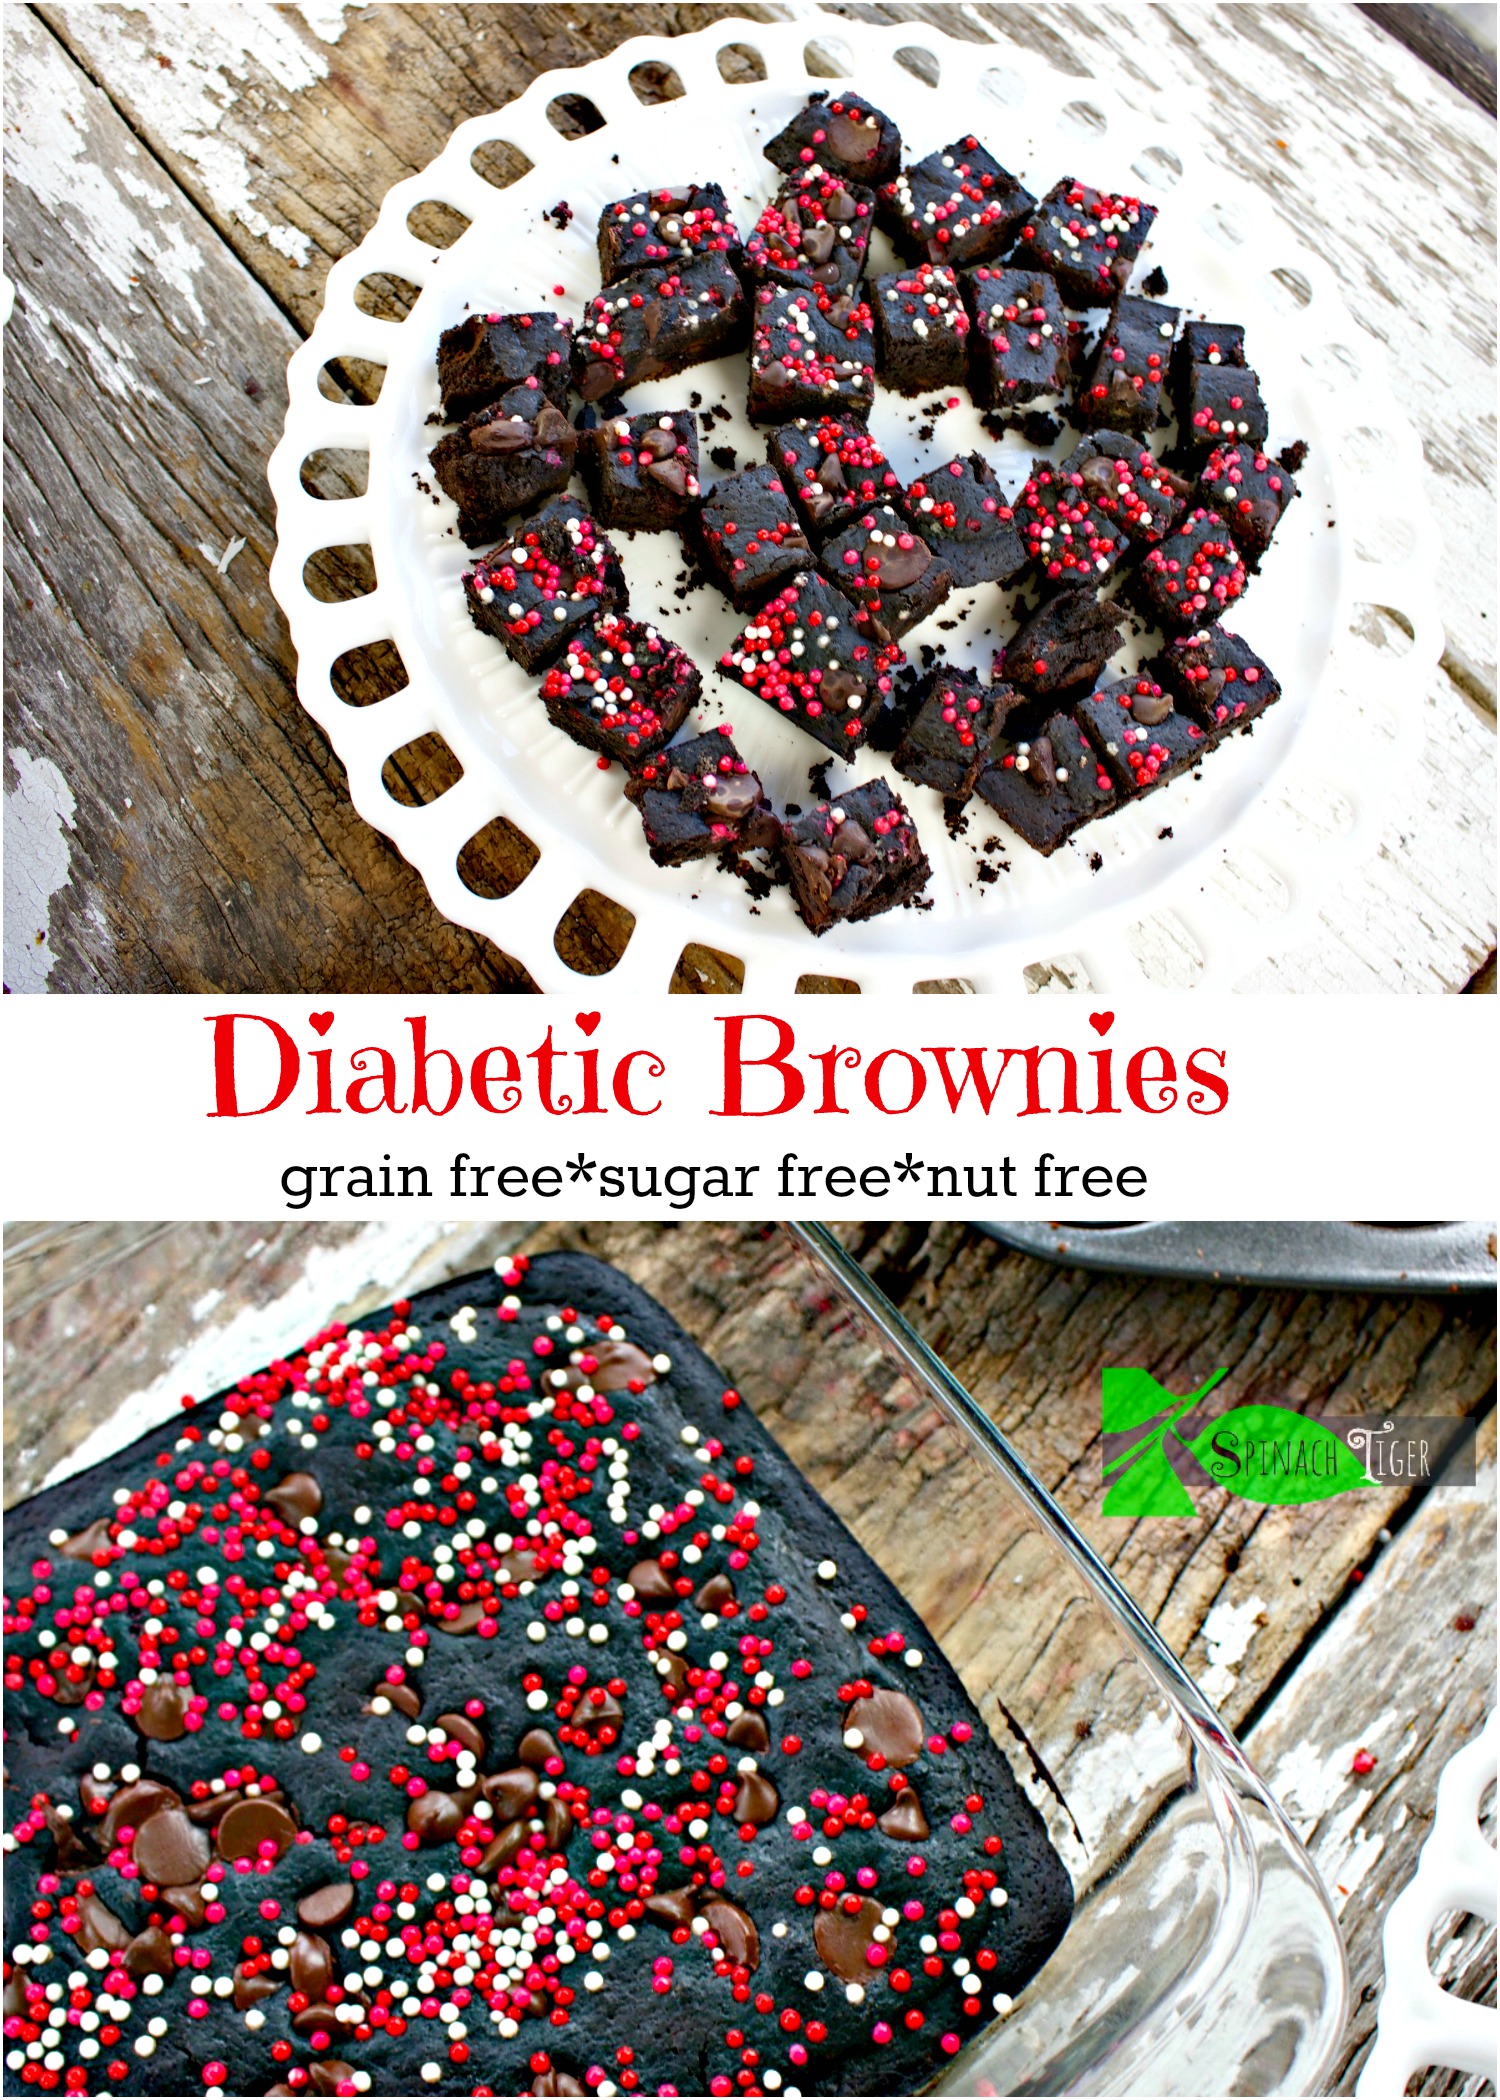 How to Make Diabetic Brownies from Spinach Tiger